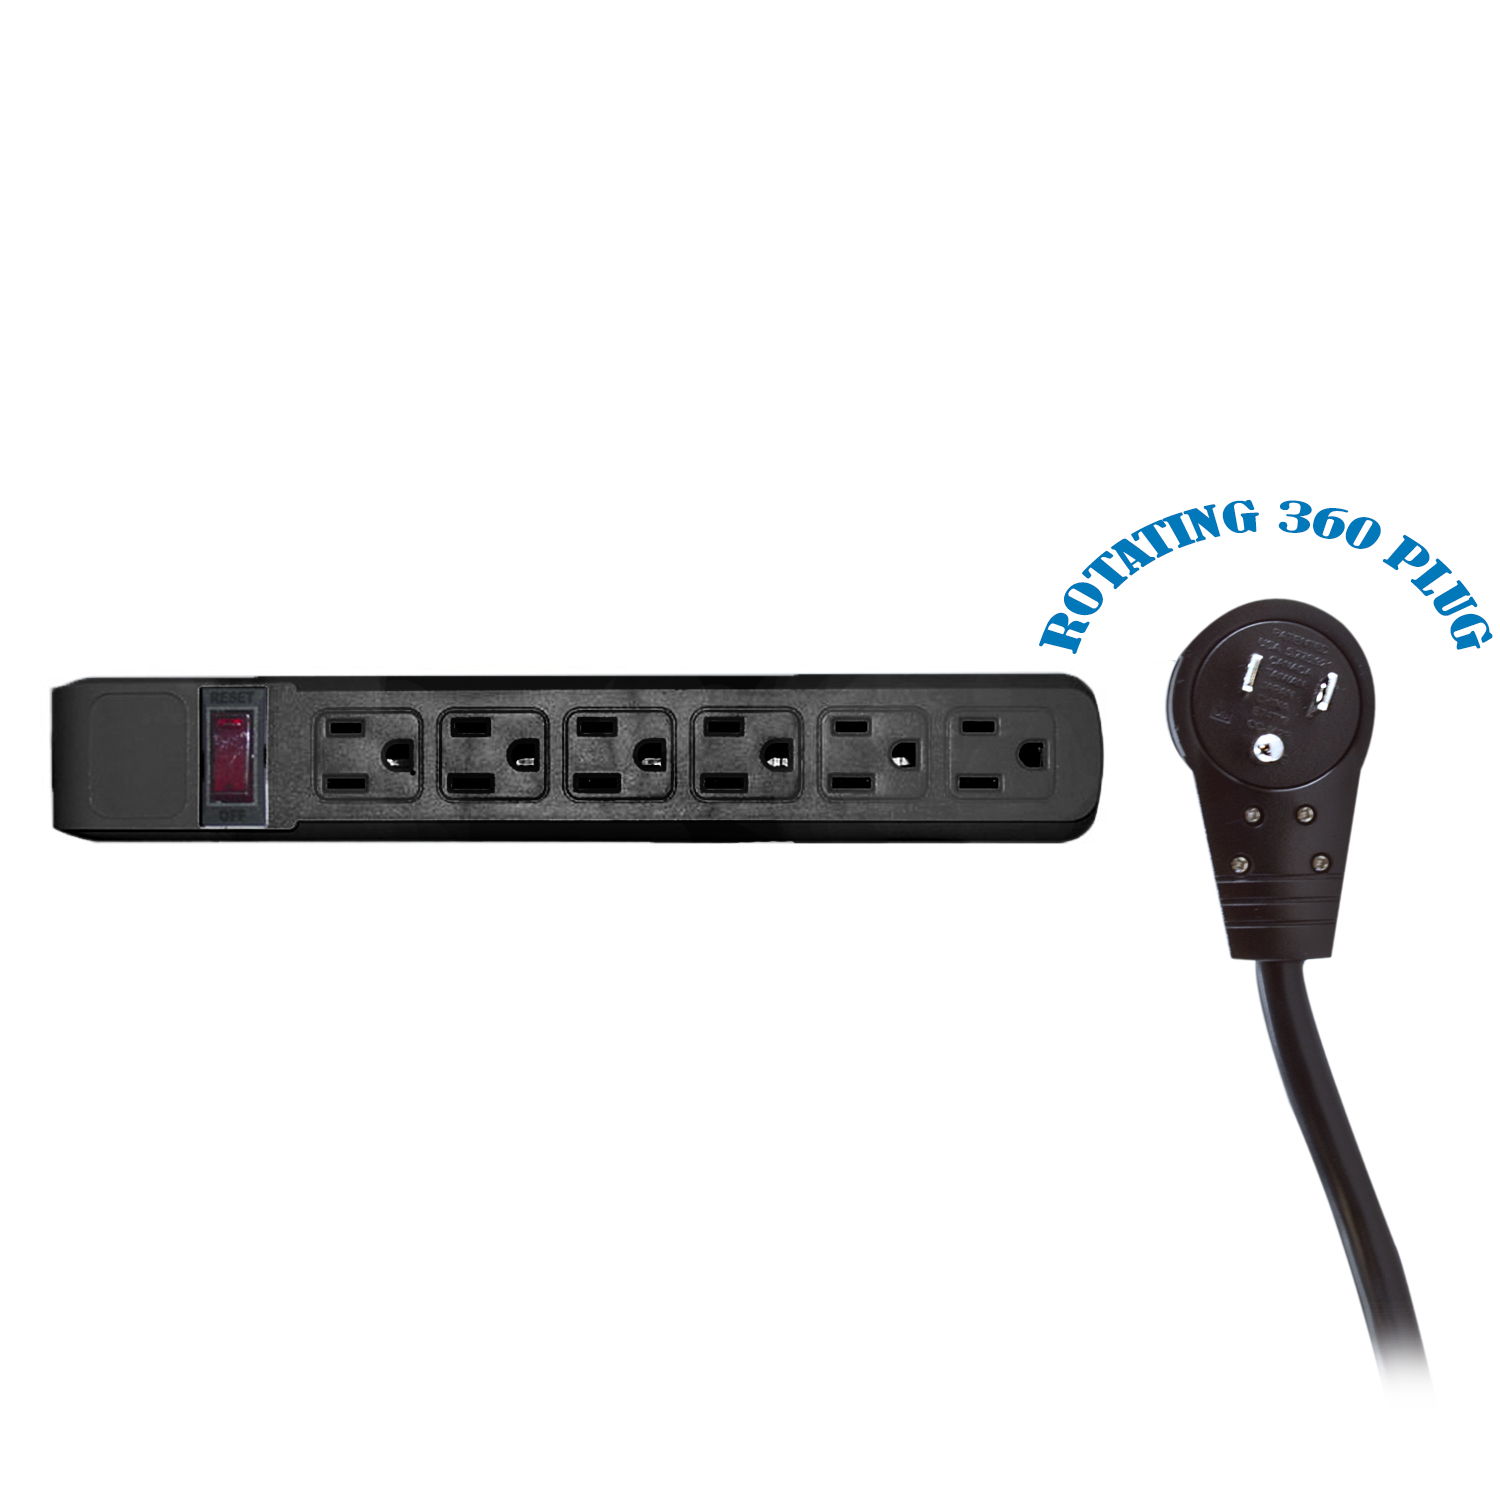 Surge Protector, Flat Rotating Plug, 6 Outlet, Black 4FT CORD